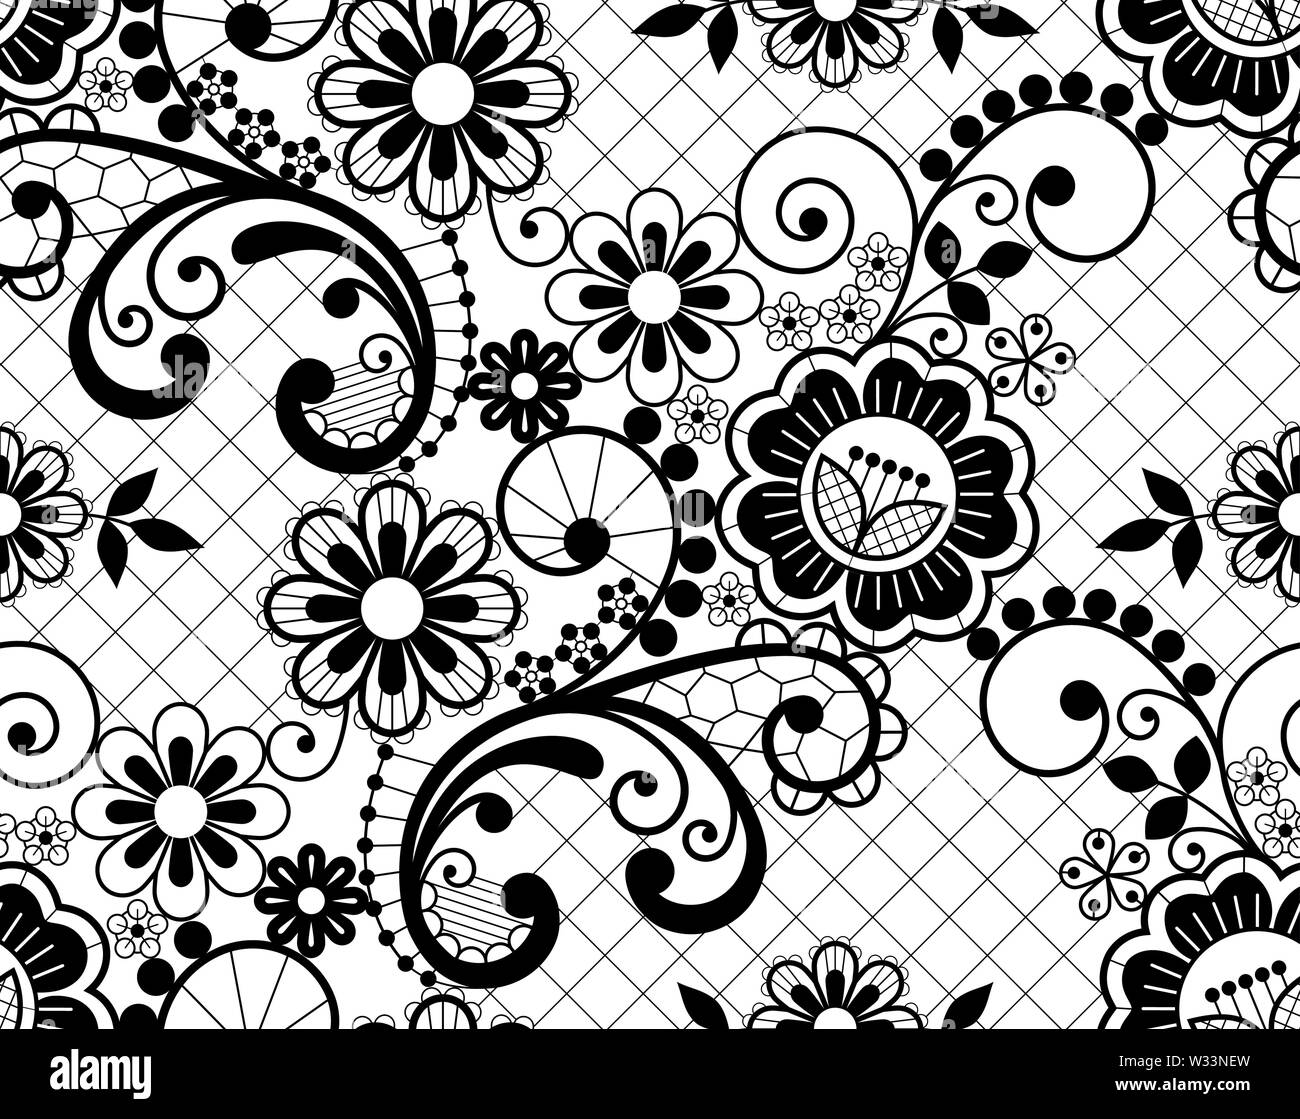 Seamless lace retro vector pattern - detailed repetitive design with flowers and swirls, ornamental background in black on white Stock Vector